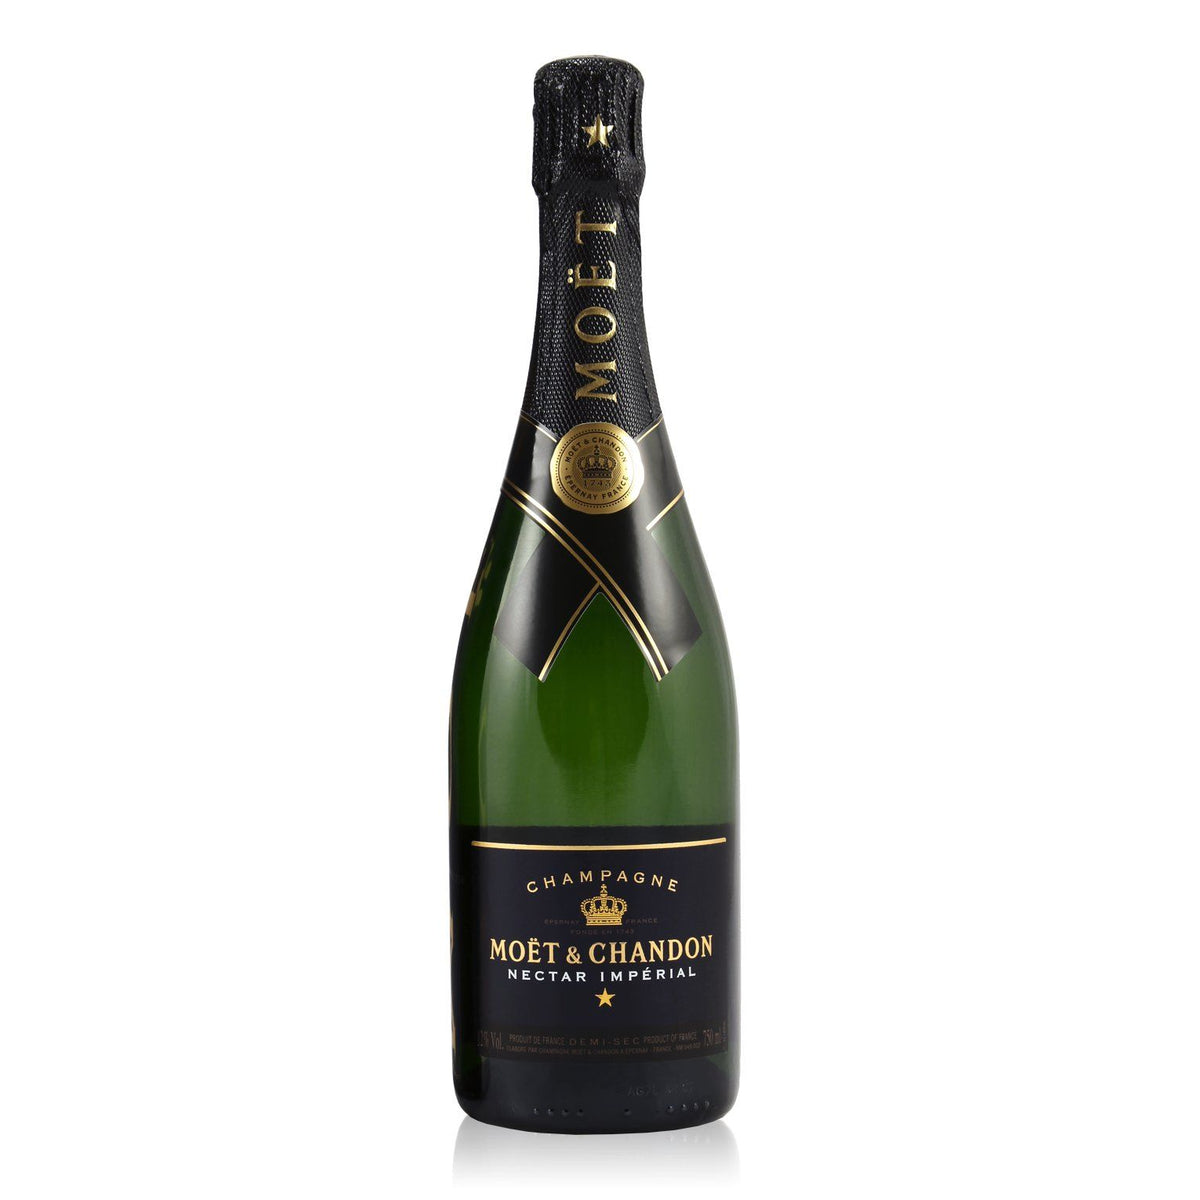 Moët & Chandon Nectar Imperial Champagne